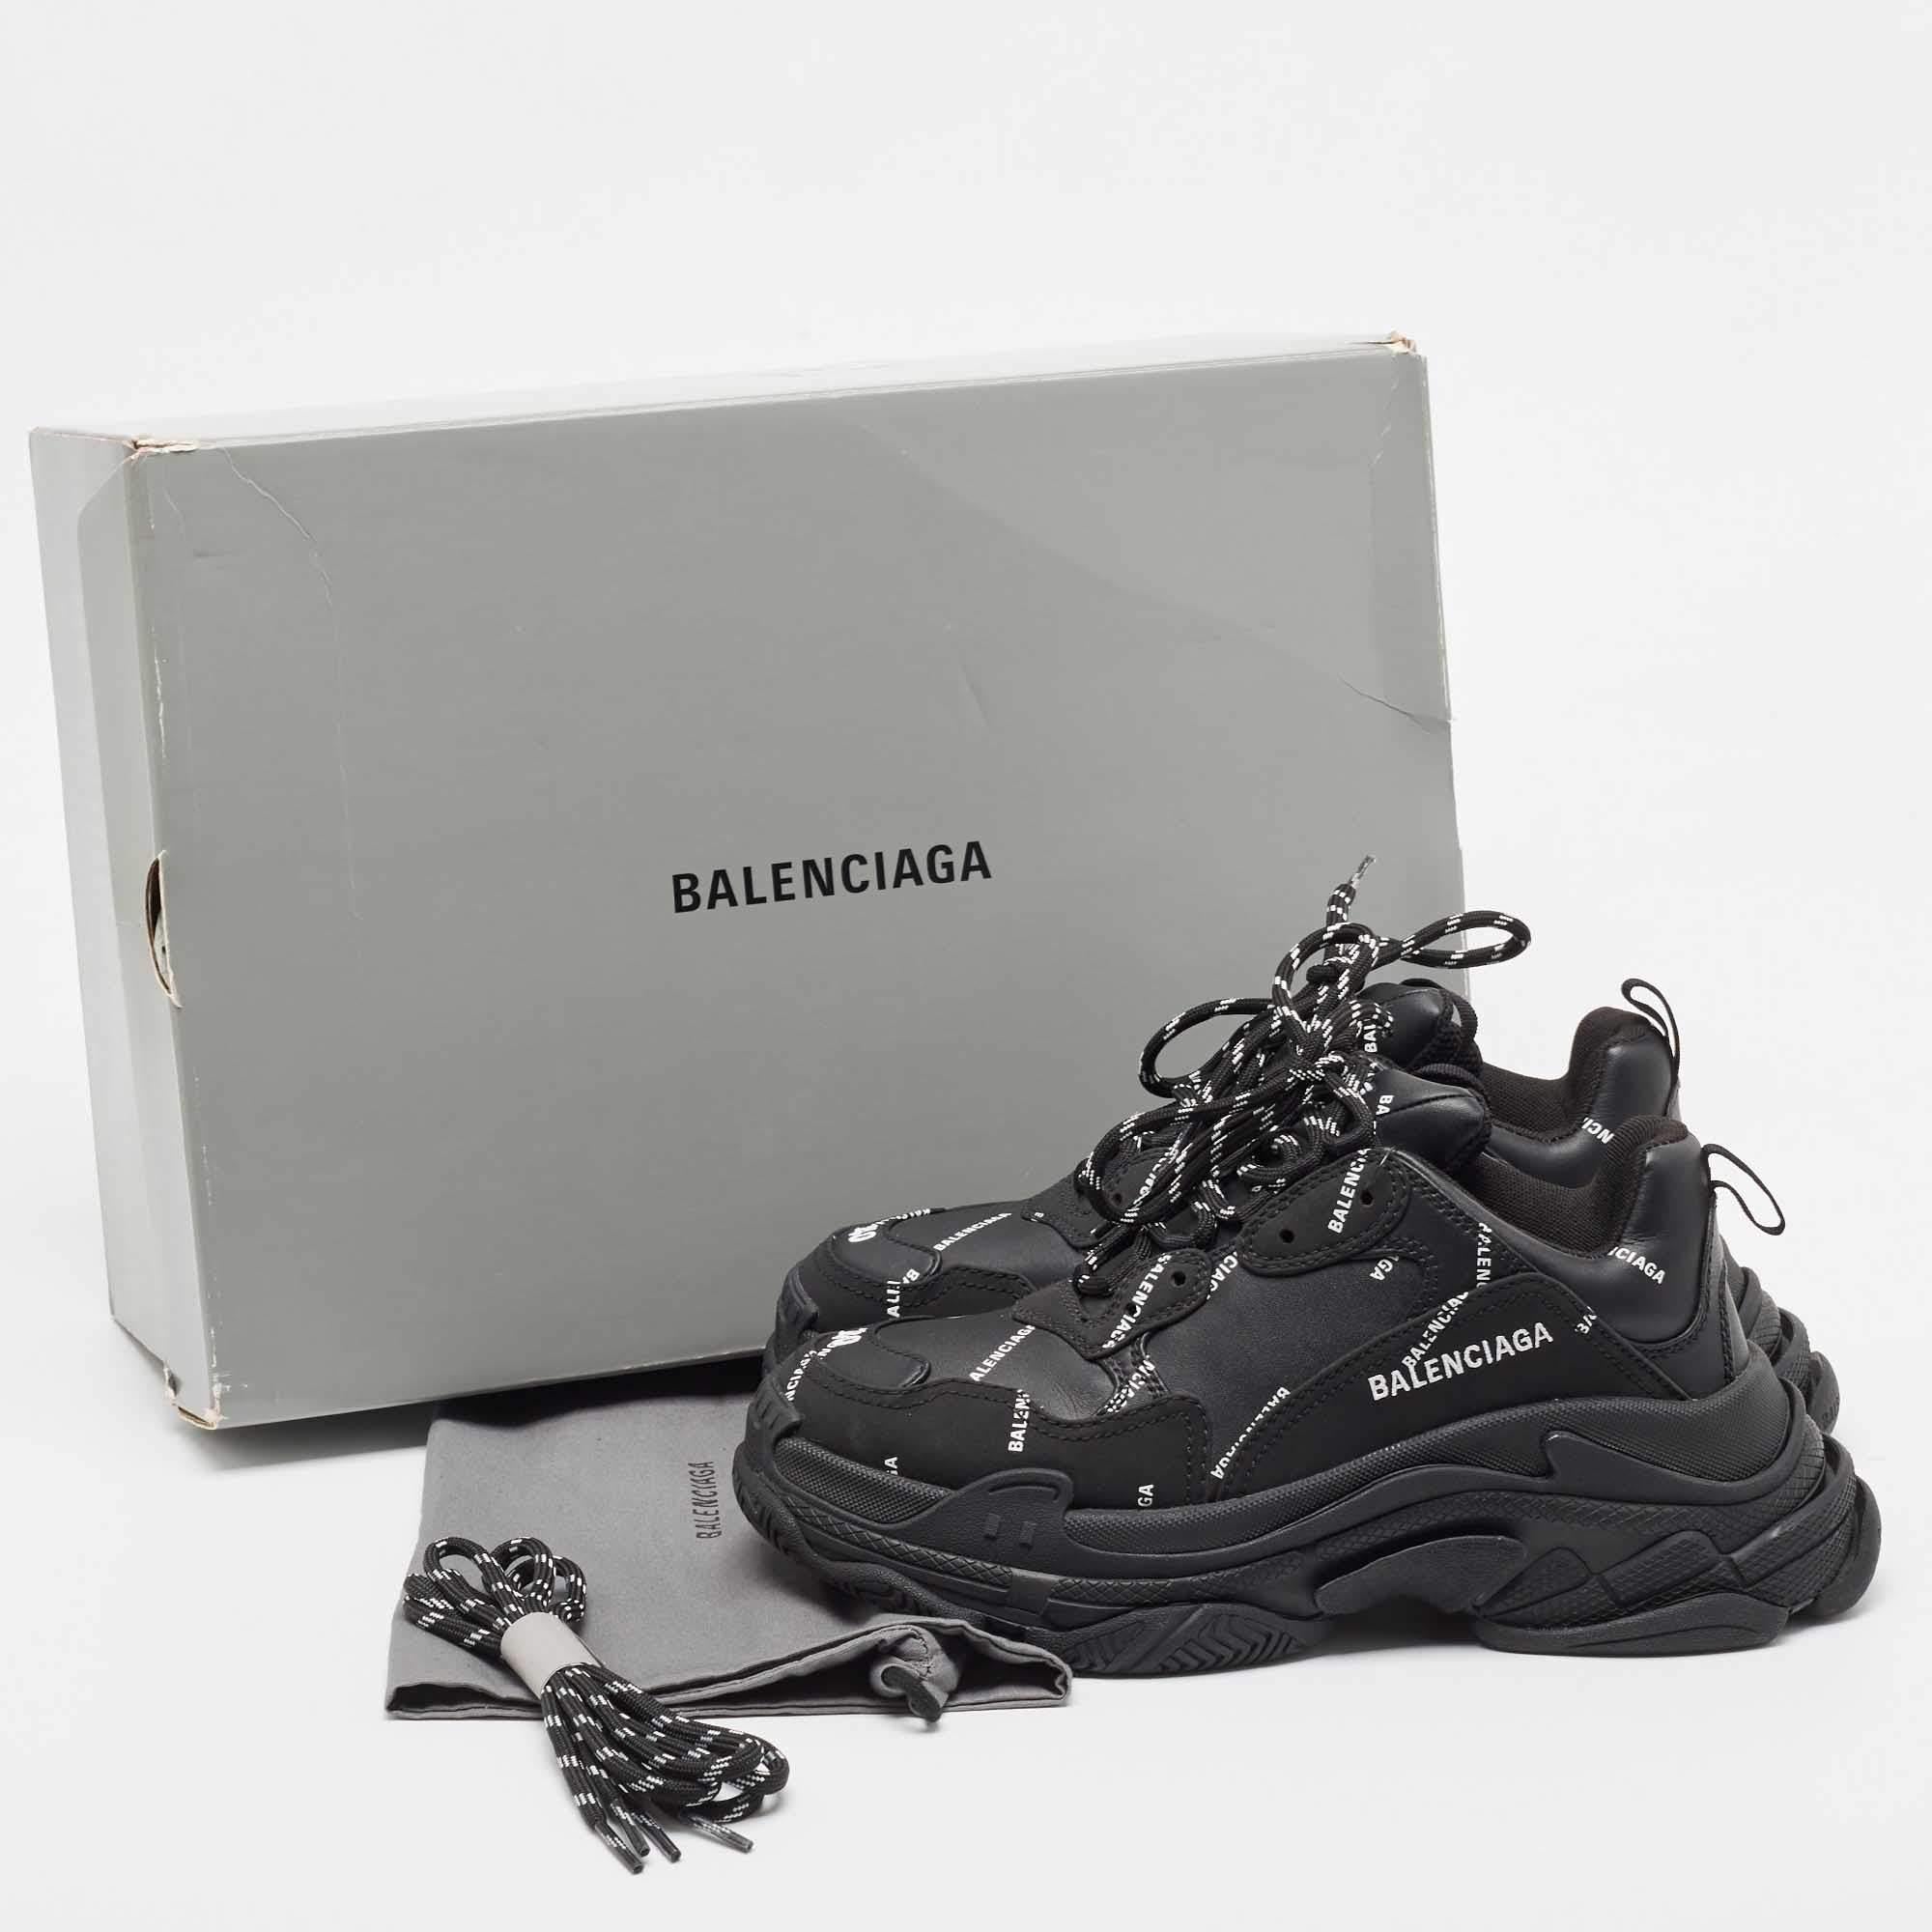 Balenciaga Black Leather and Nubuck Allover Logo Triple S Sneakers Size 40 For Sale 6